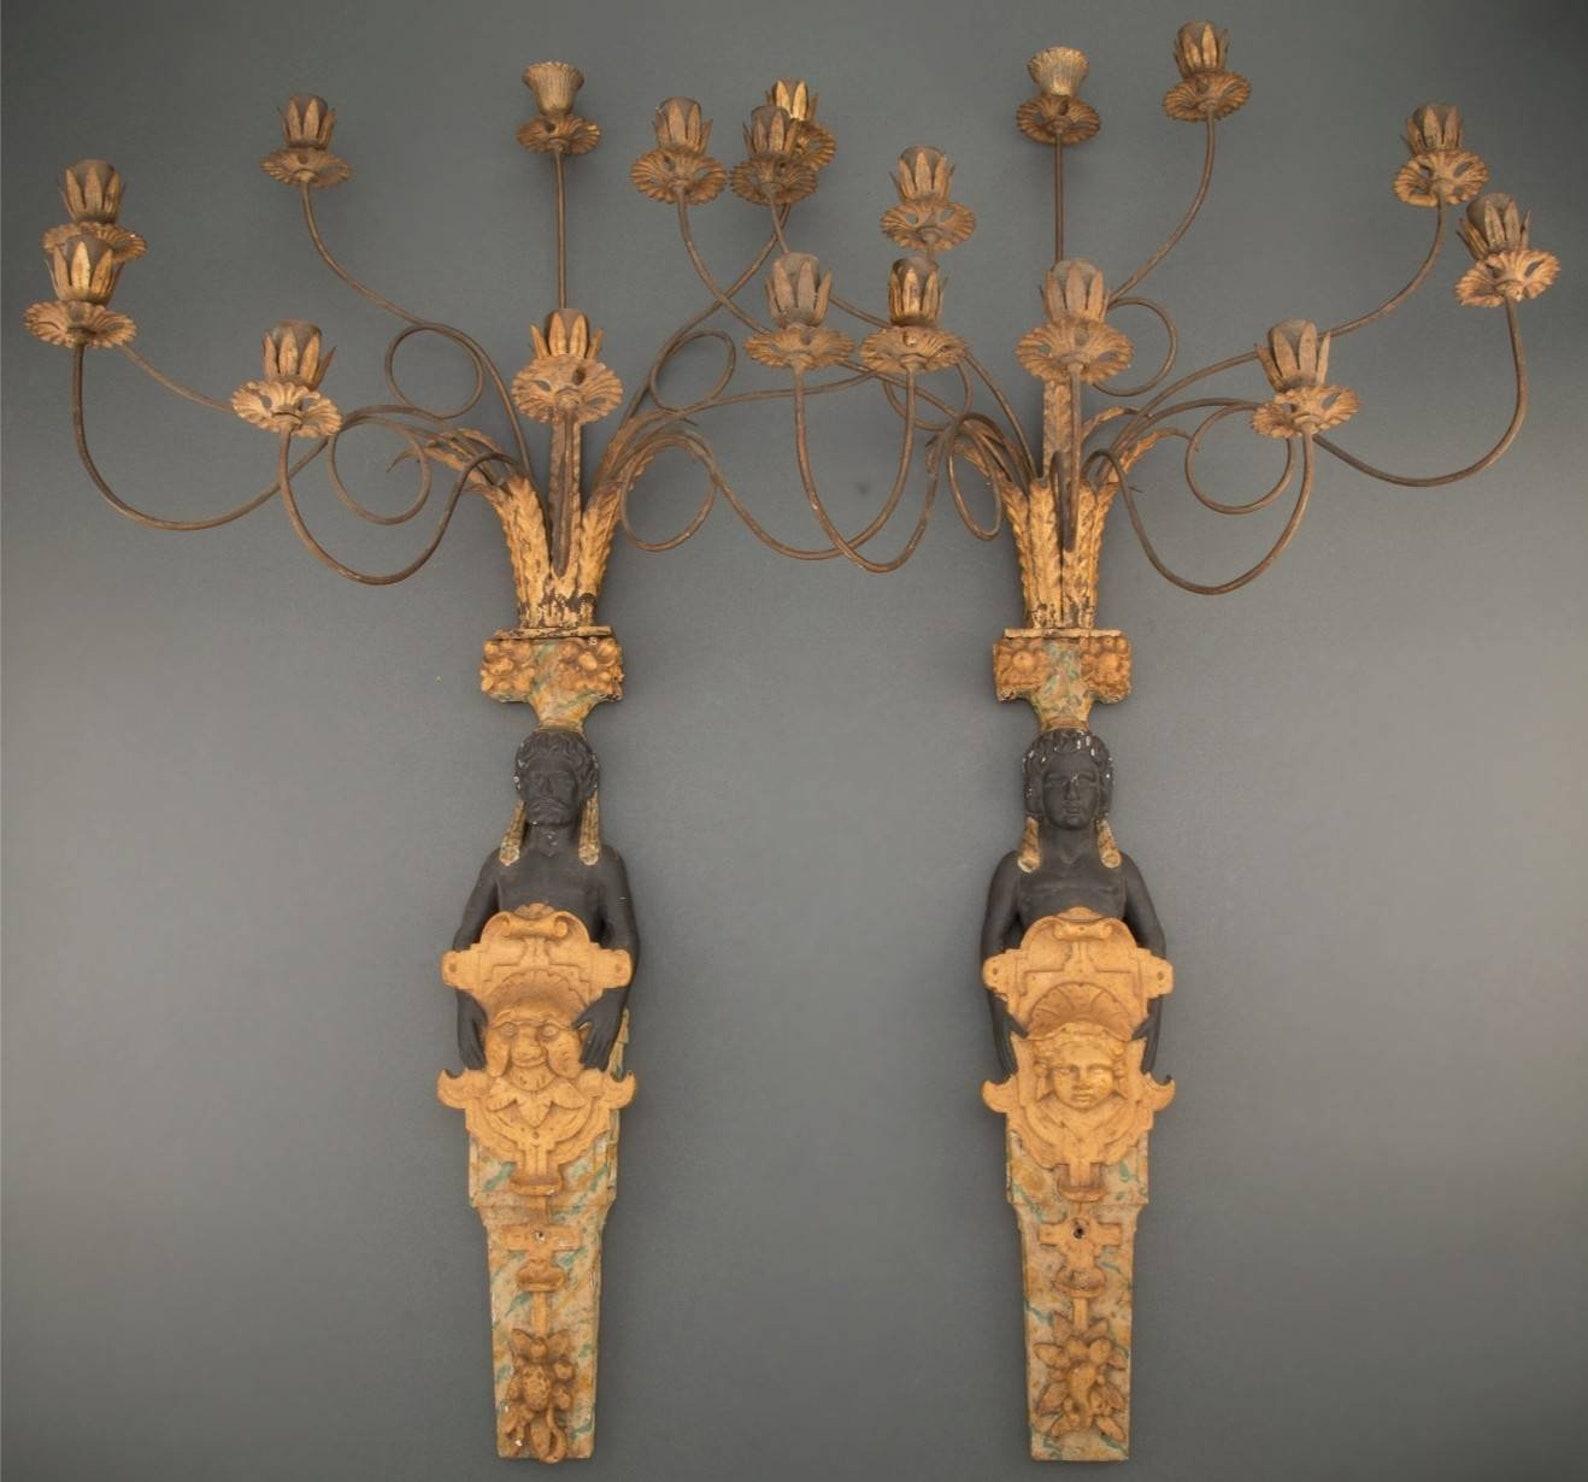 A most impressive pair of French Napoleon III Second Empire Period Egyptian Revival style gessoed, gilded and polychrome painted wood and gilt metal foliate scroll arm nine light
candle sconces. 

Hand-crafted in France, most likely Parisian